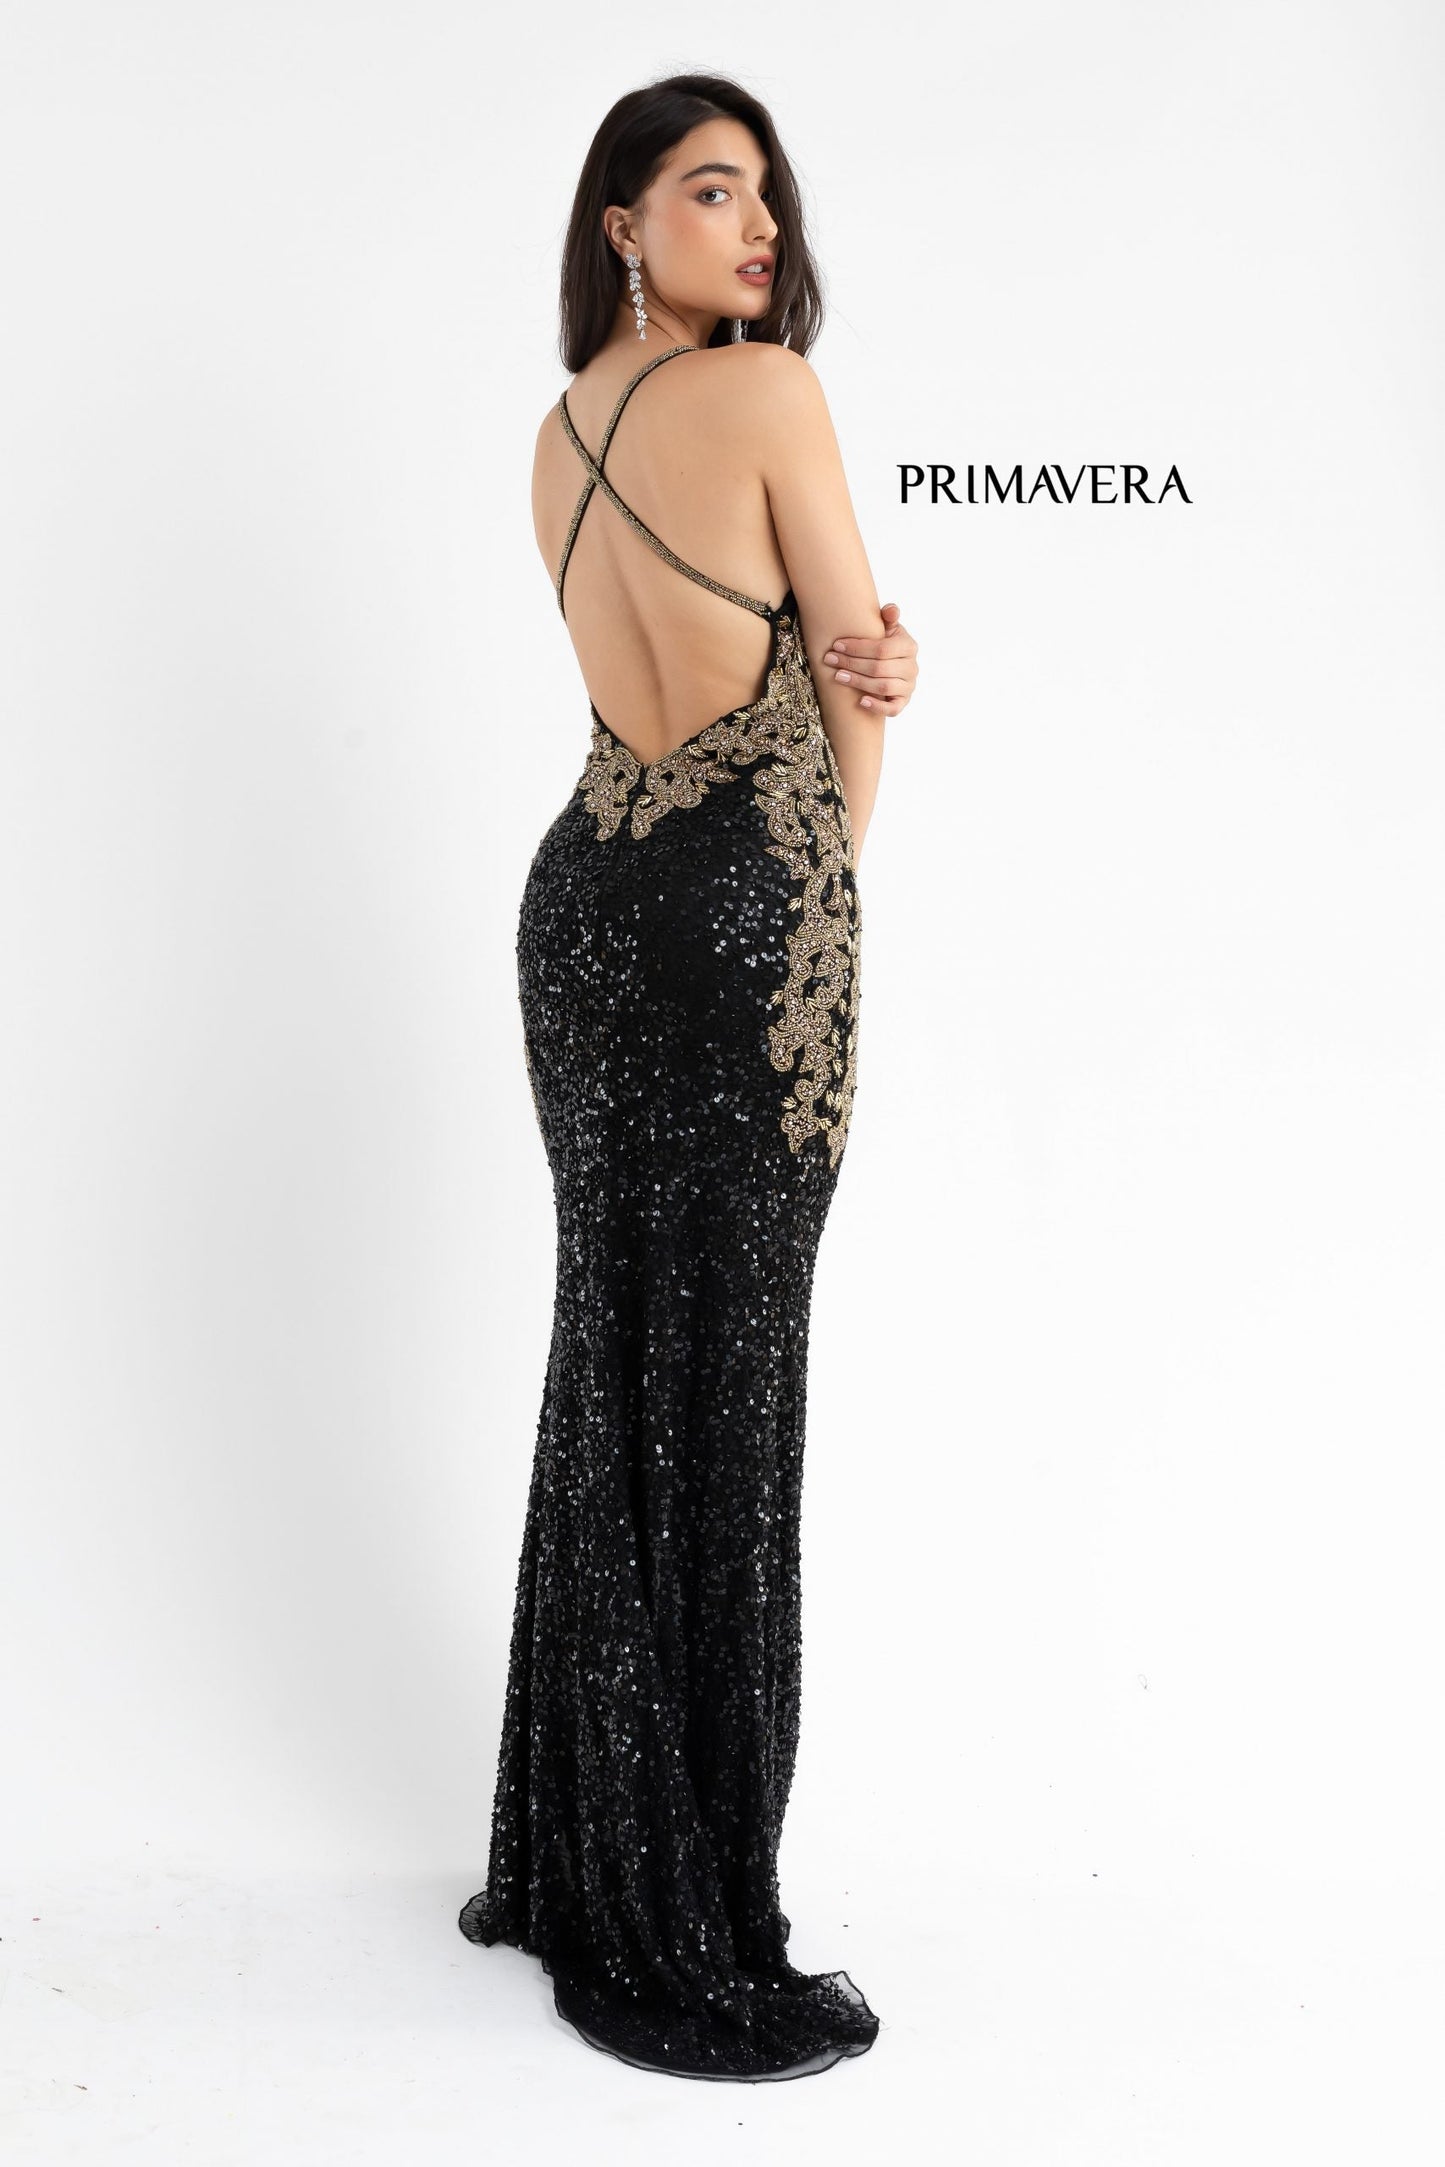 Primavera Couture 3765 Size 12 Sequined Prom Dress with Bead Trimmed V Neckline Slit Train